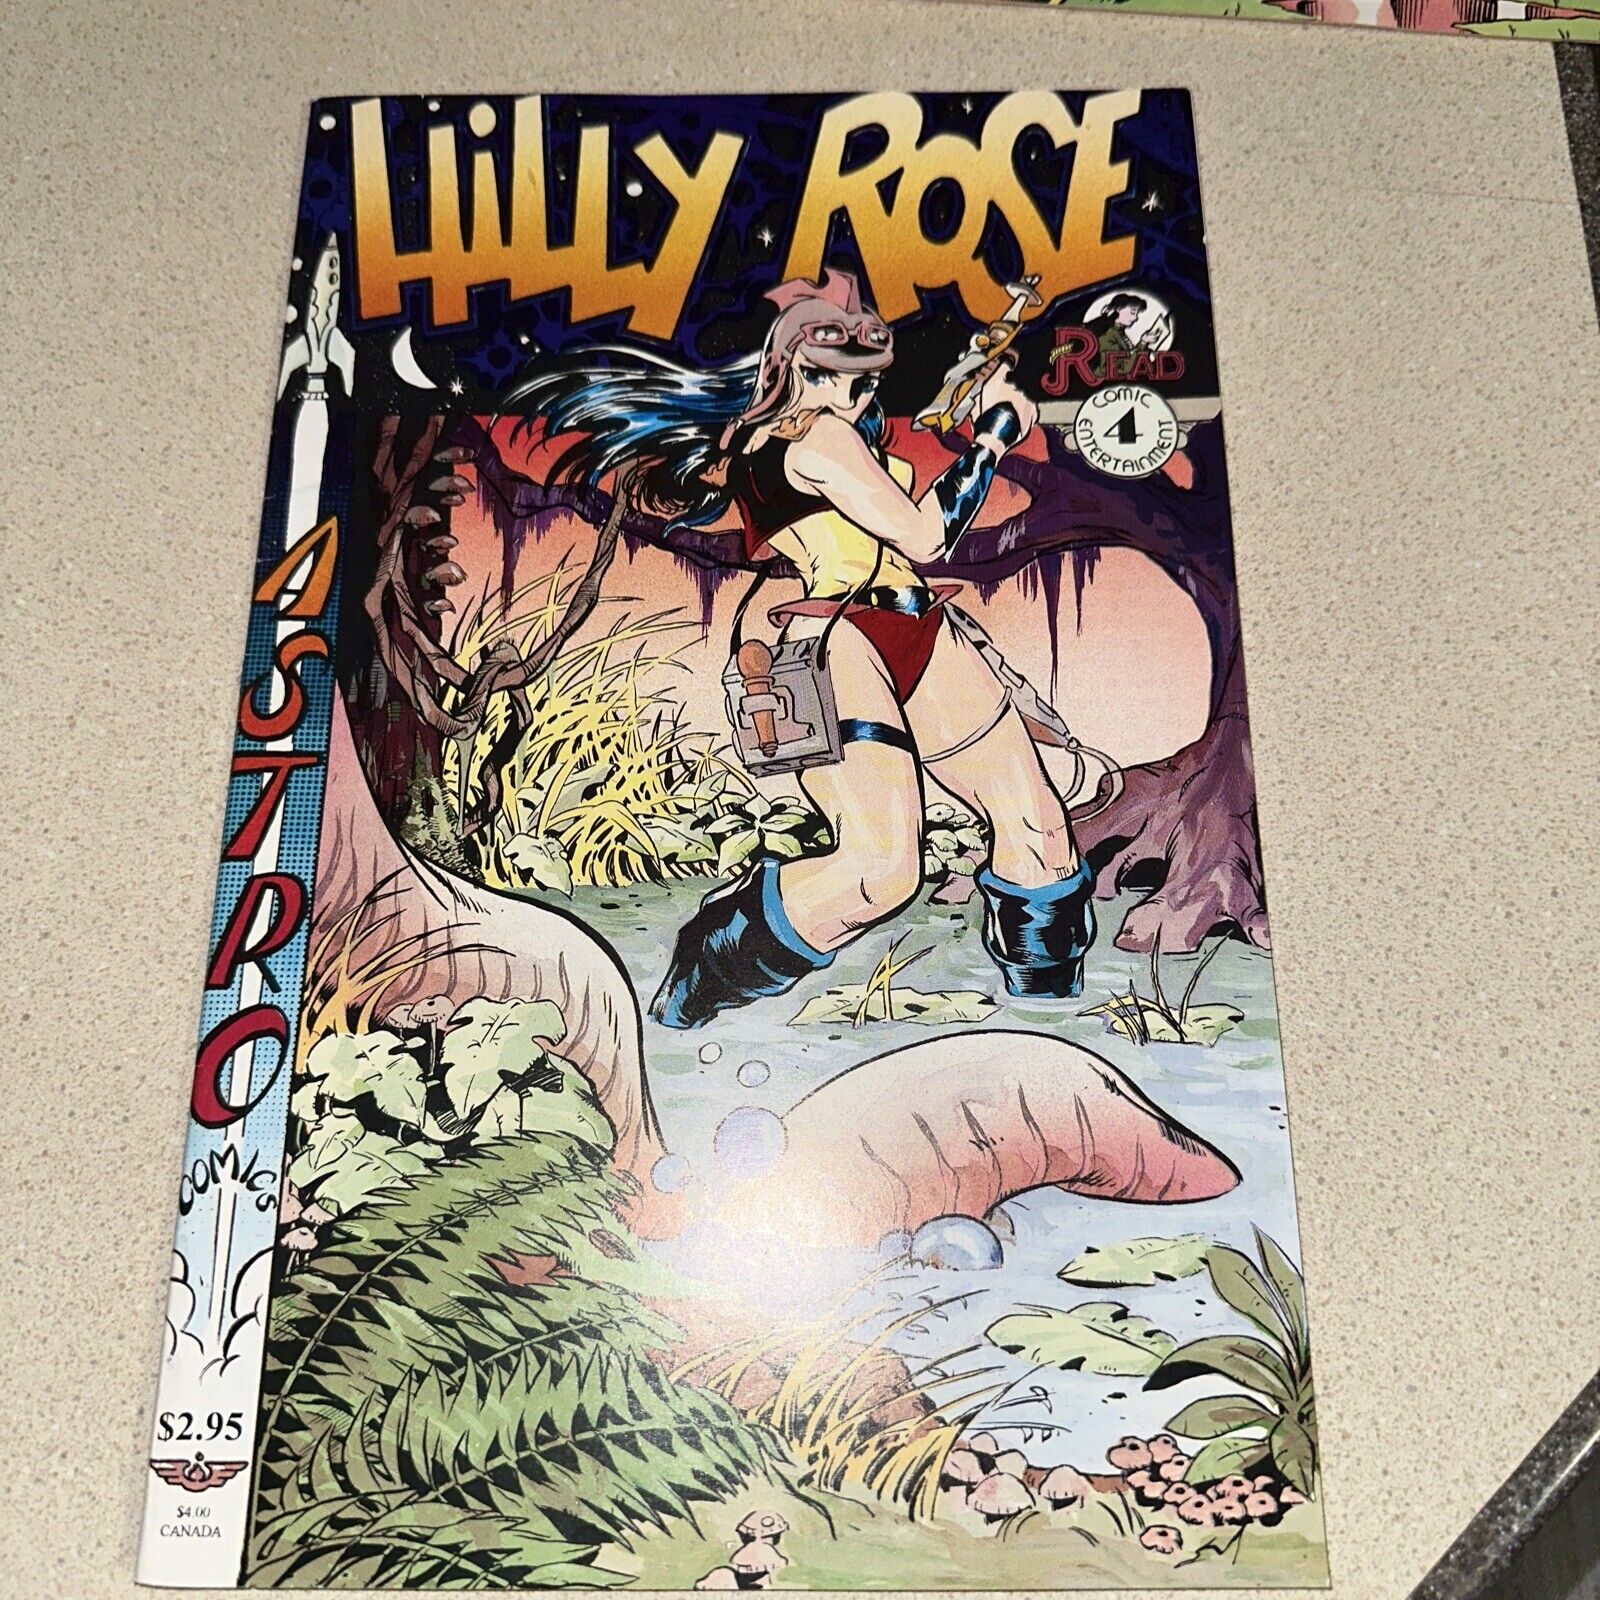 Hilly Rose #4 Astro Comics signed by B.C. Boyer